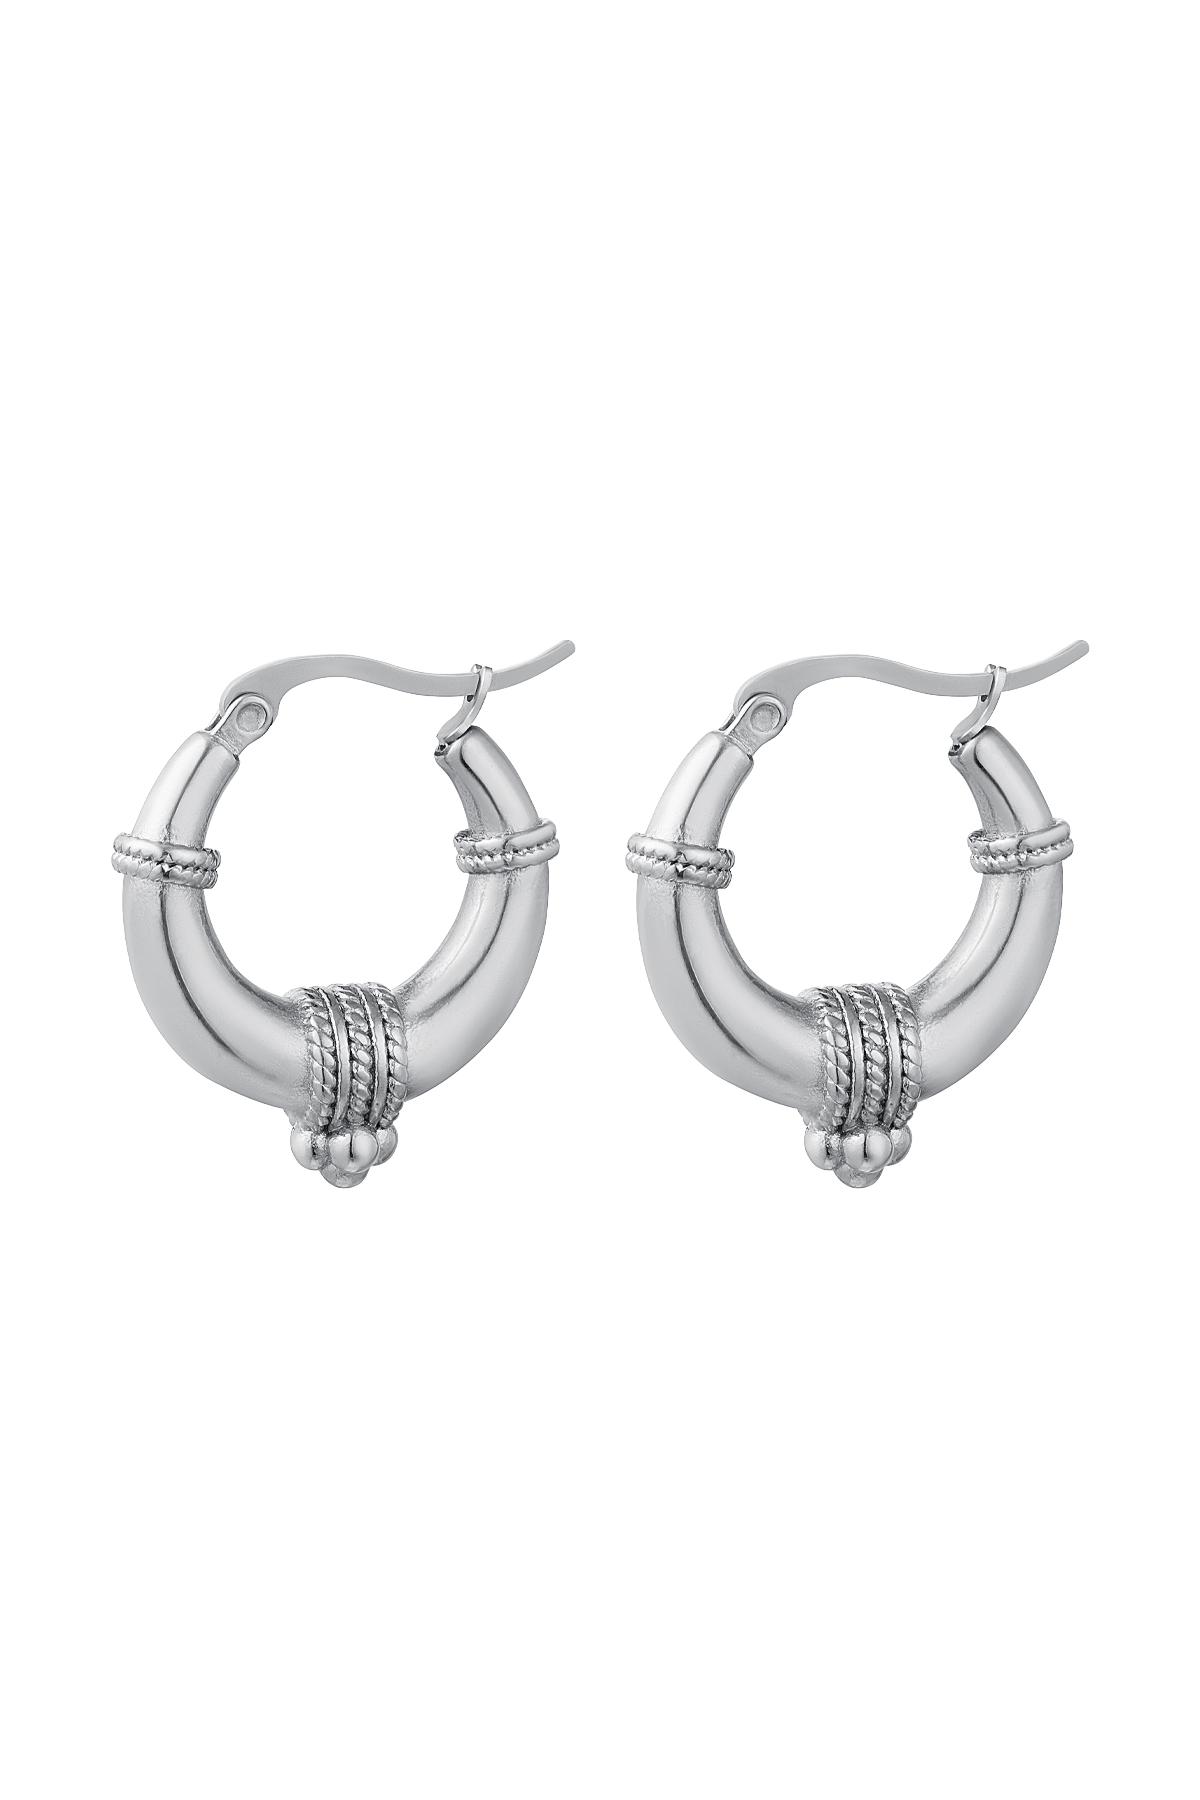 Stainless steel earrings with rope detail - Large Silver h5 